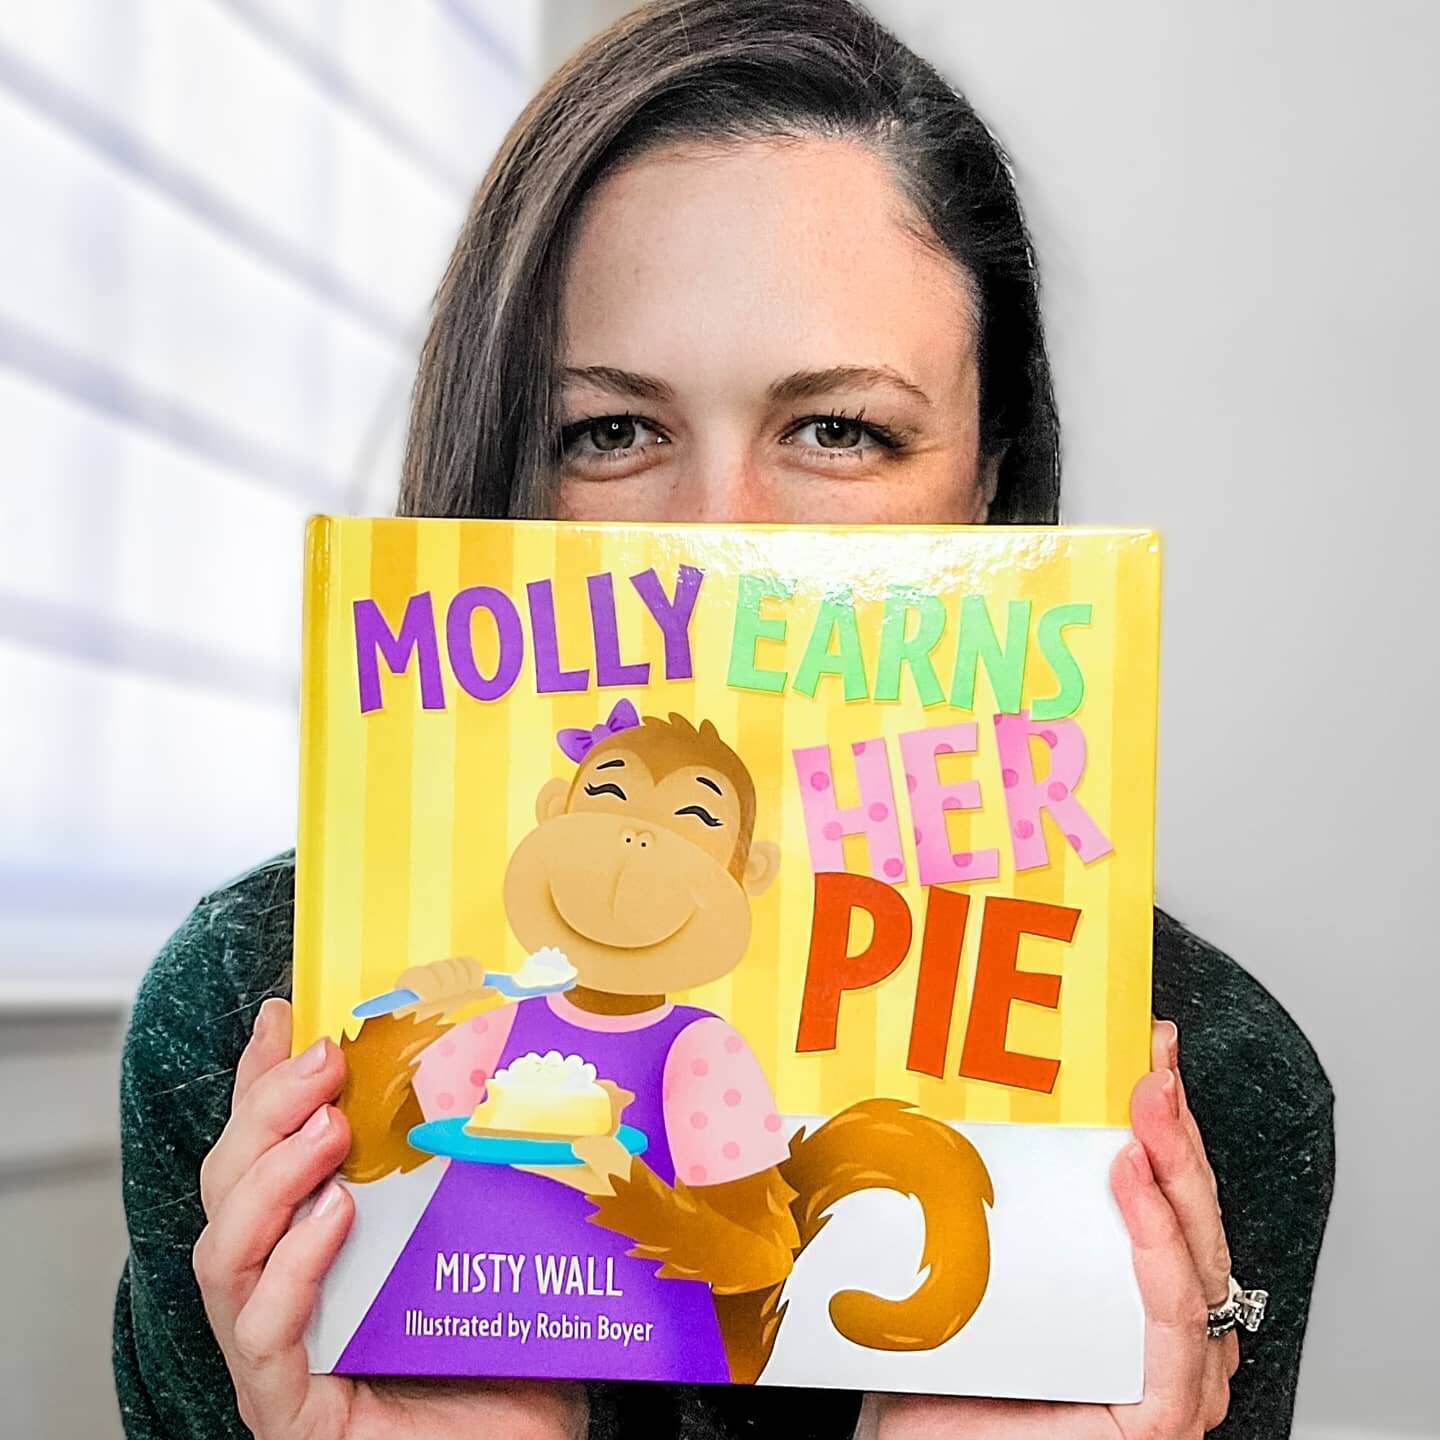 My name is Misty Wall and I'm the author of MOLLY EARNS HER PIE and I'm so excited to share this book with you. I'm a CPA &amp; mom to a 4-year-old boy and I wrote this book to help teach my son (and all kids!) the most fundamental lesson about money